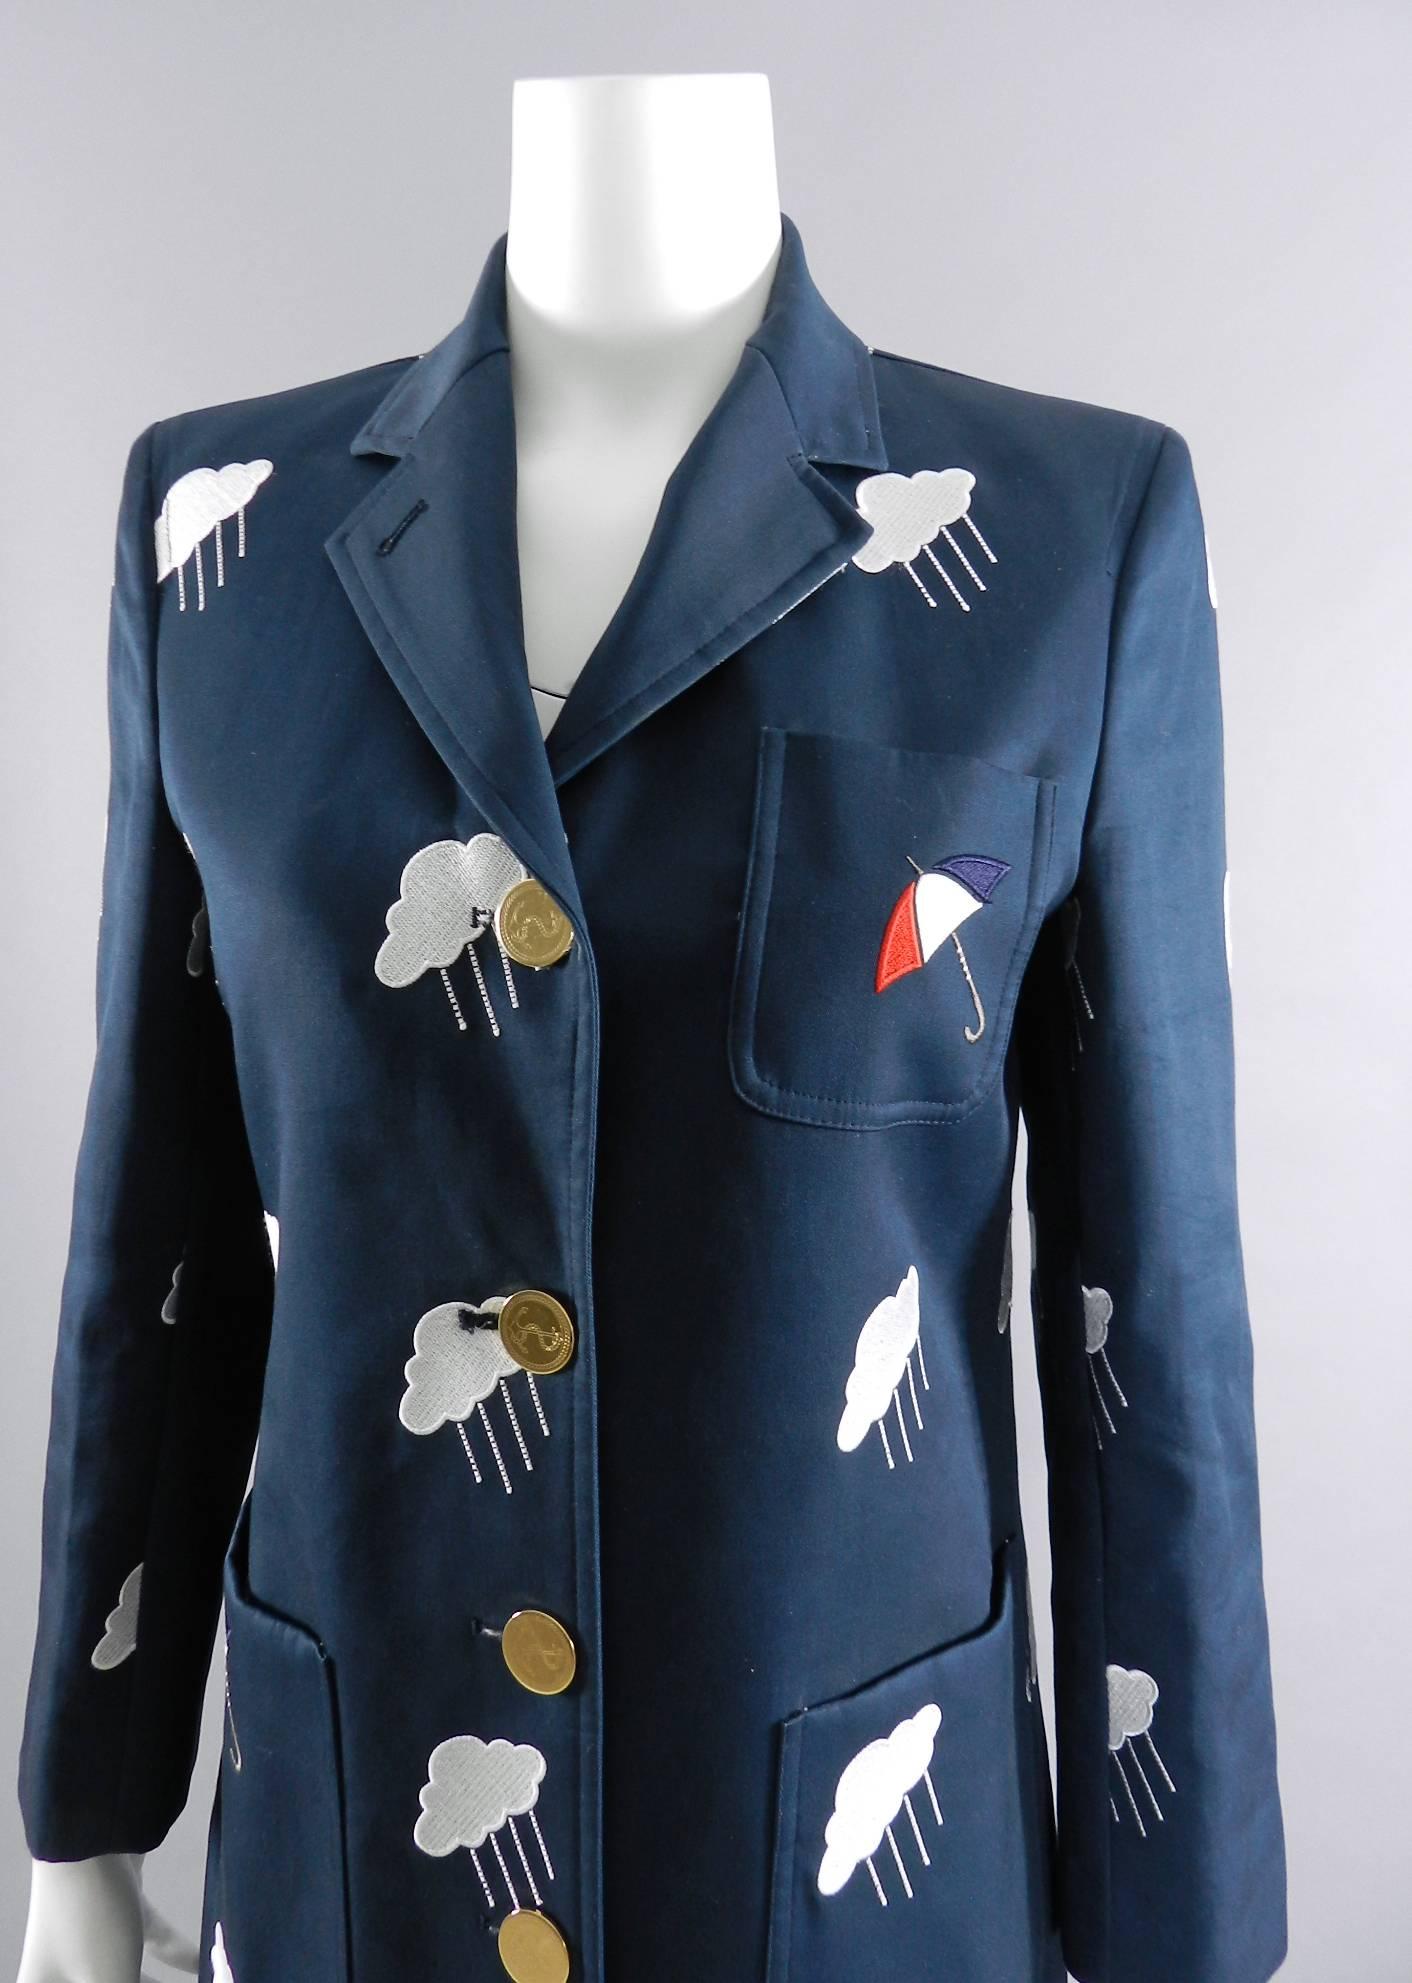 Black Thom Browne Navy Embroidered Coat with Umbrellas and Clouds